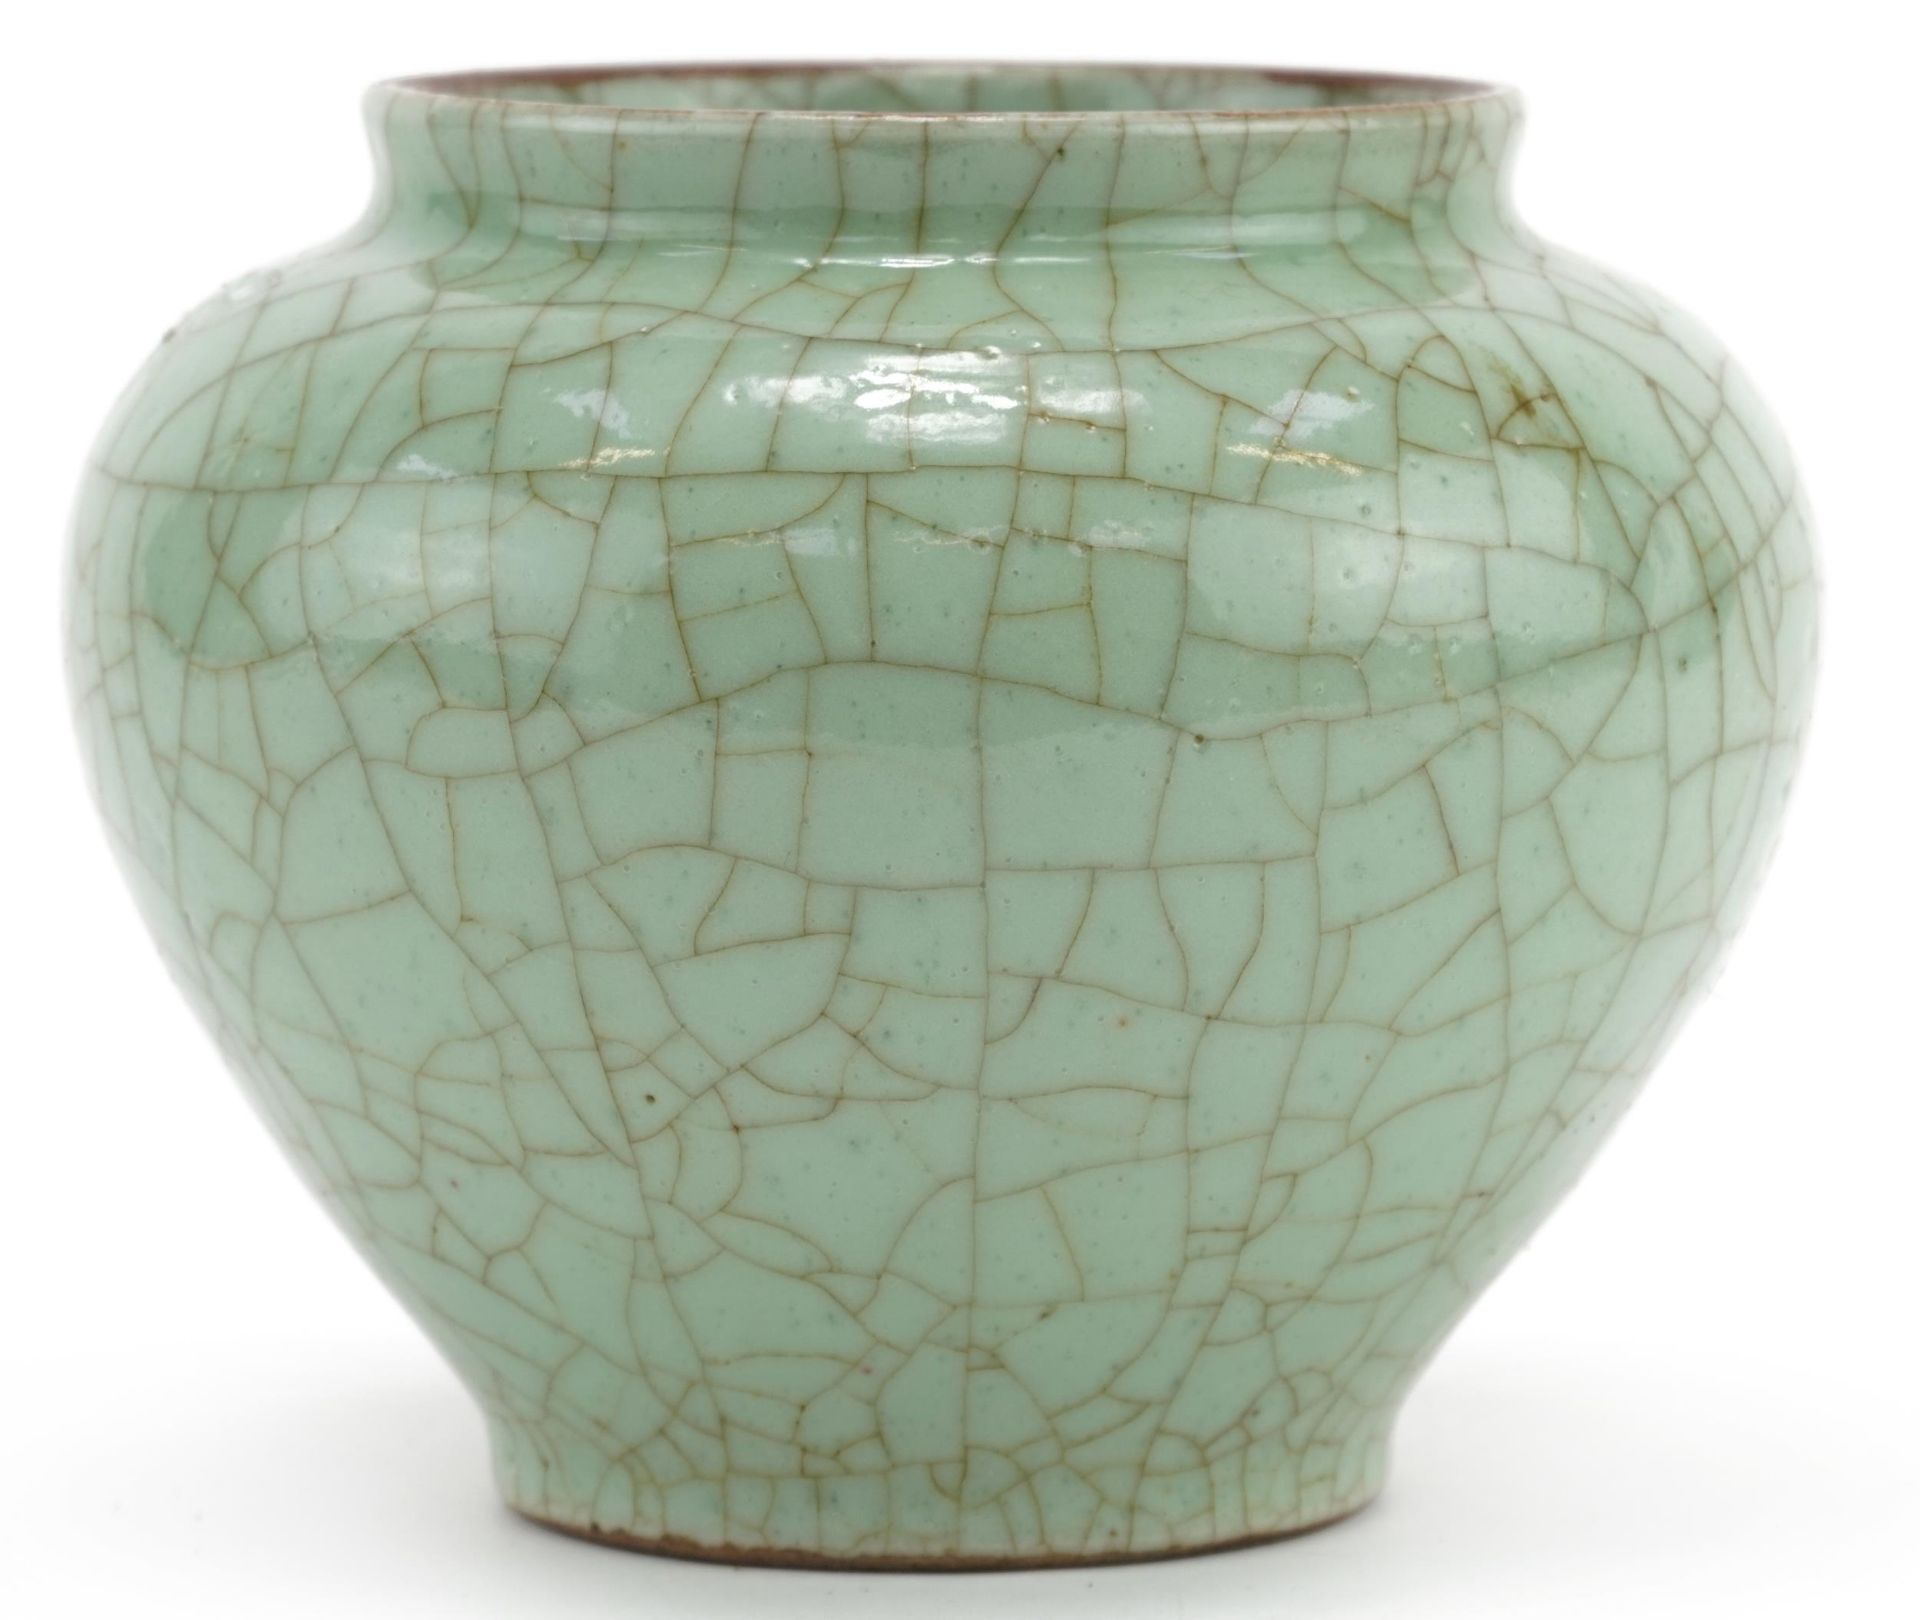 Chinese porcelain Ge ware type vase having a green crackle glaze, 12cm high : For further